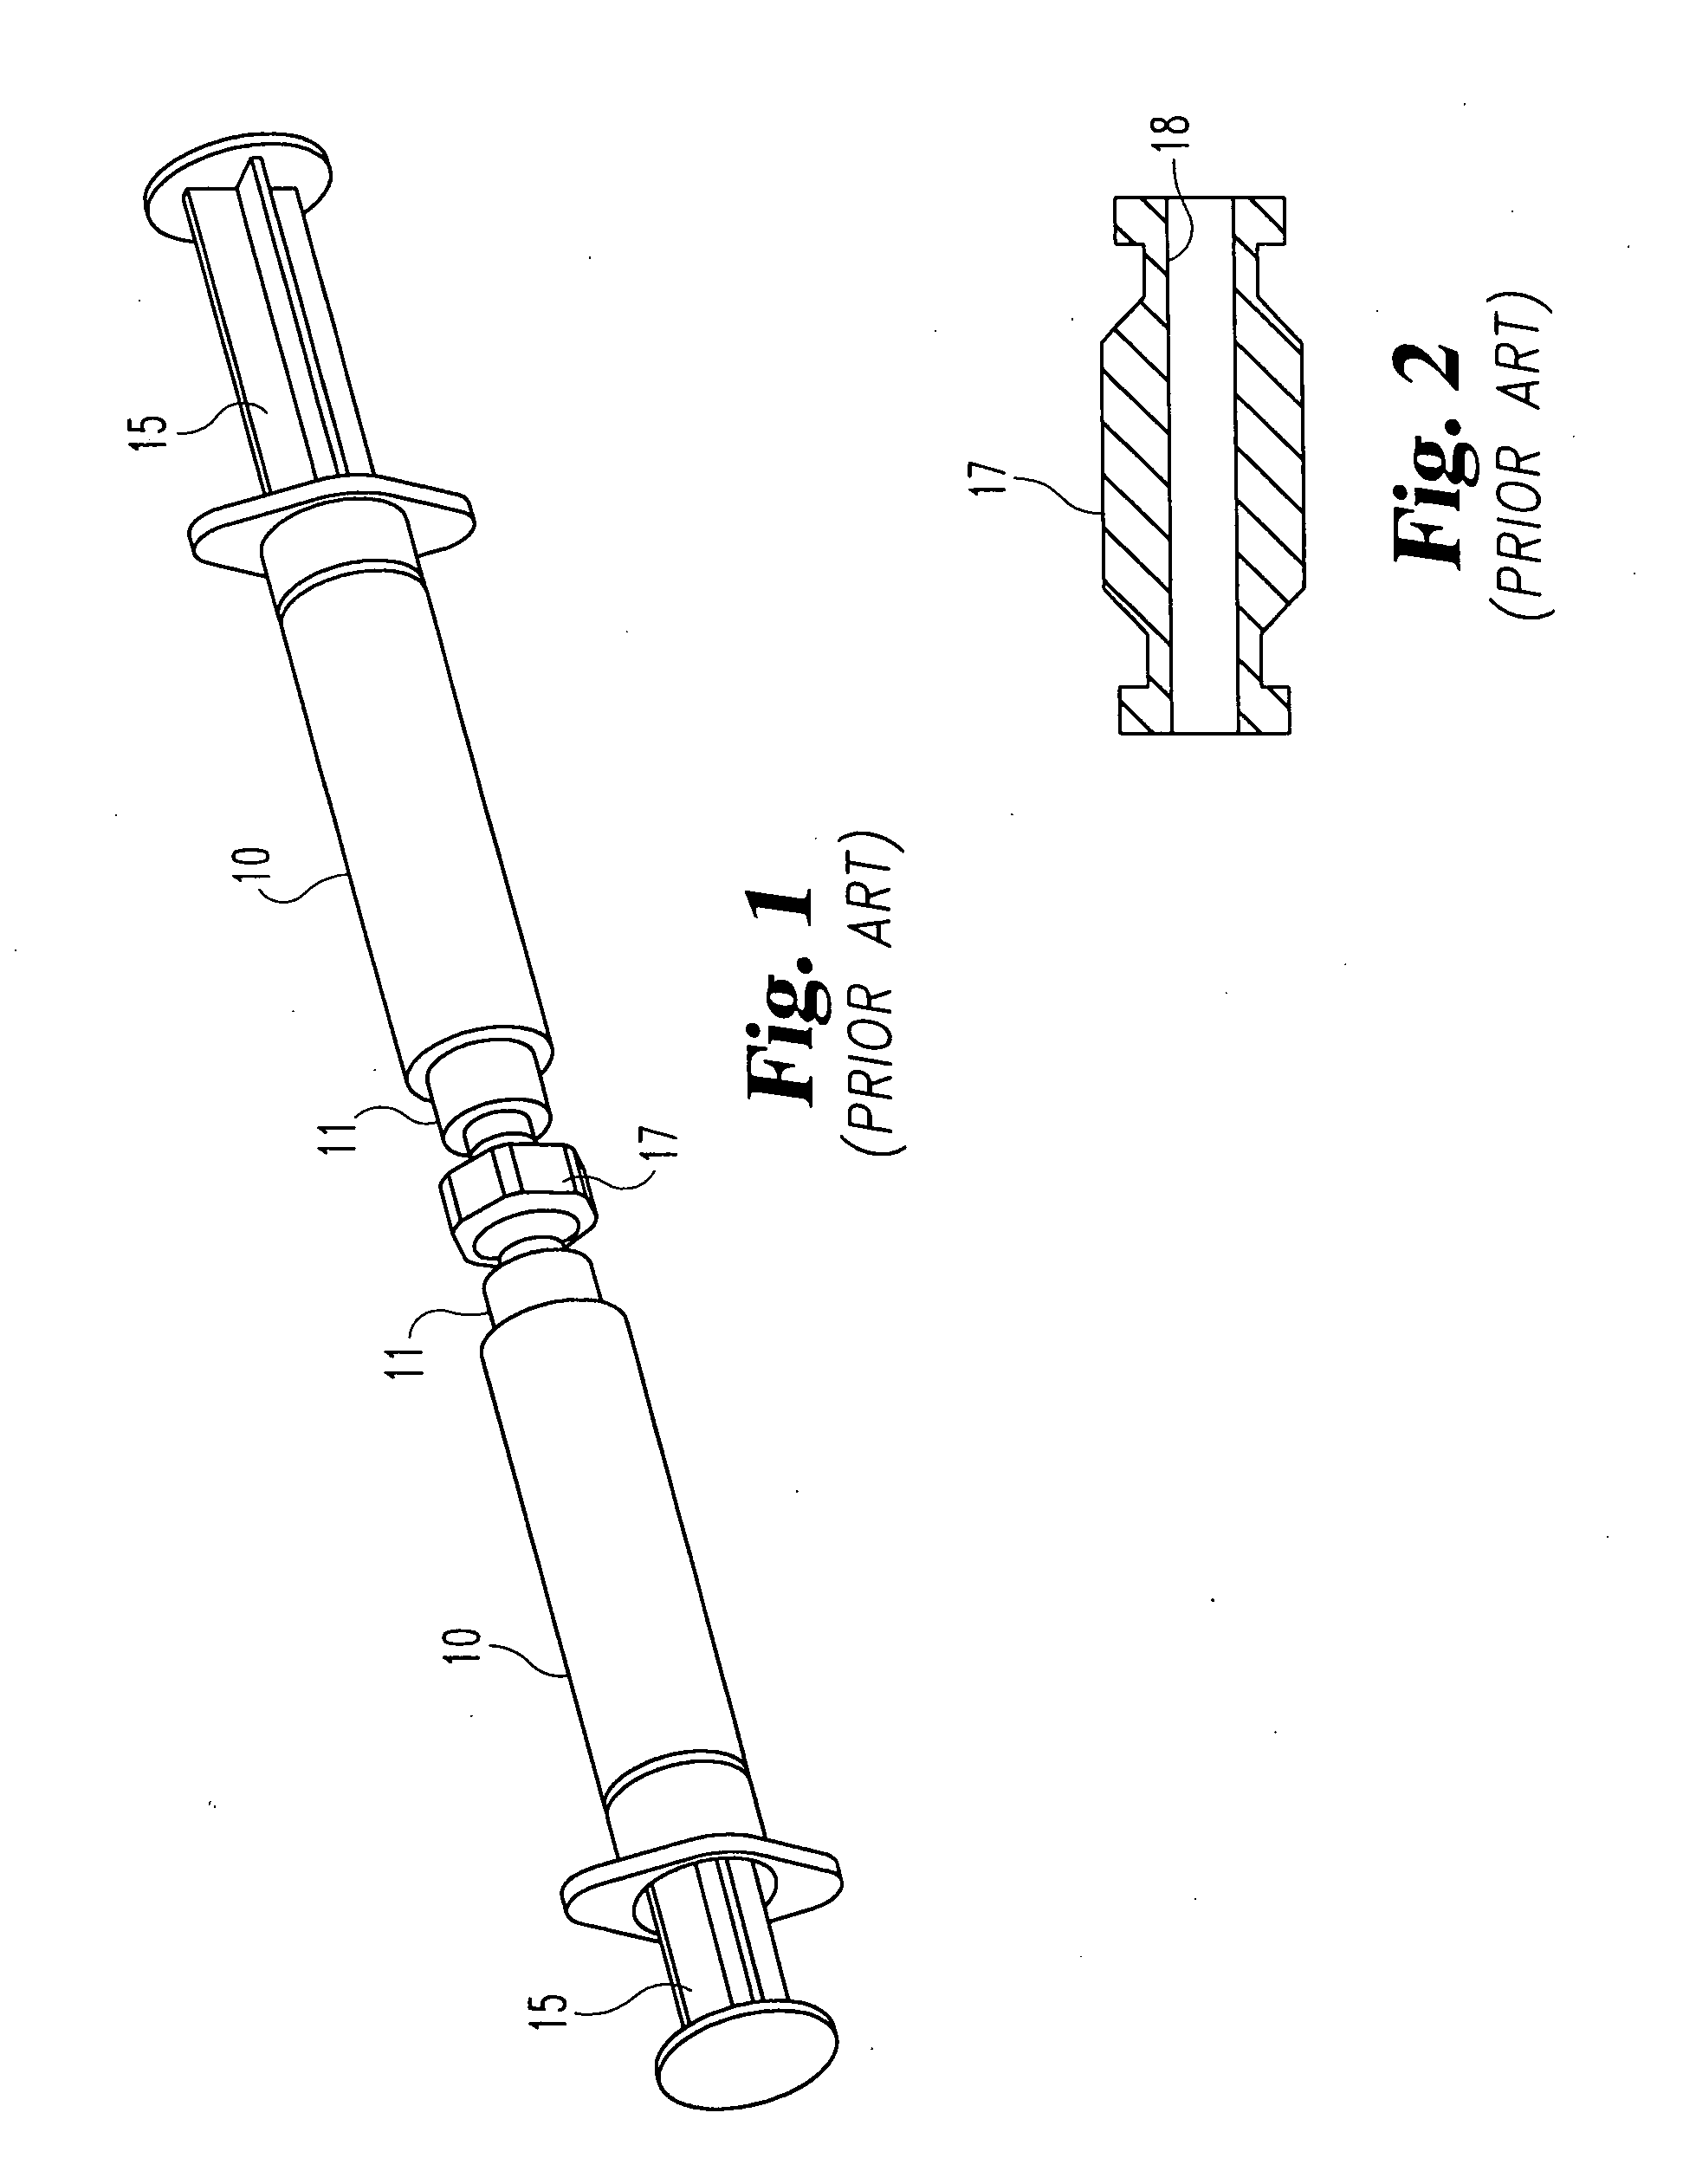 Systems and methods for mixing fluids